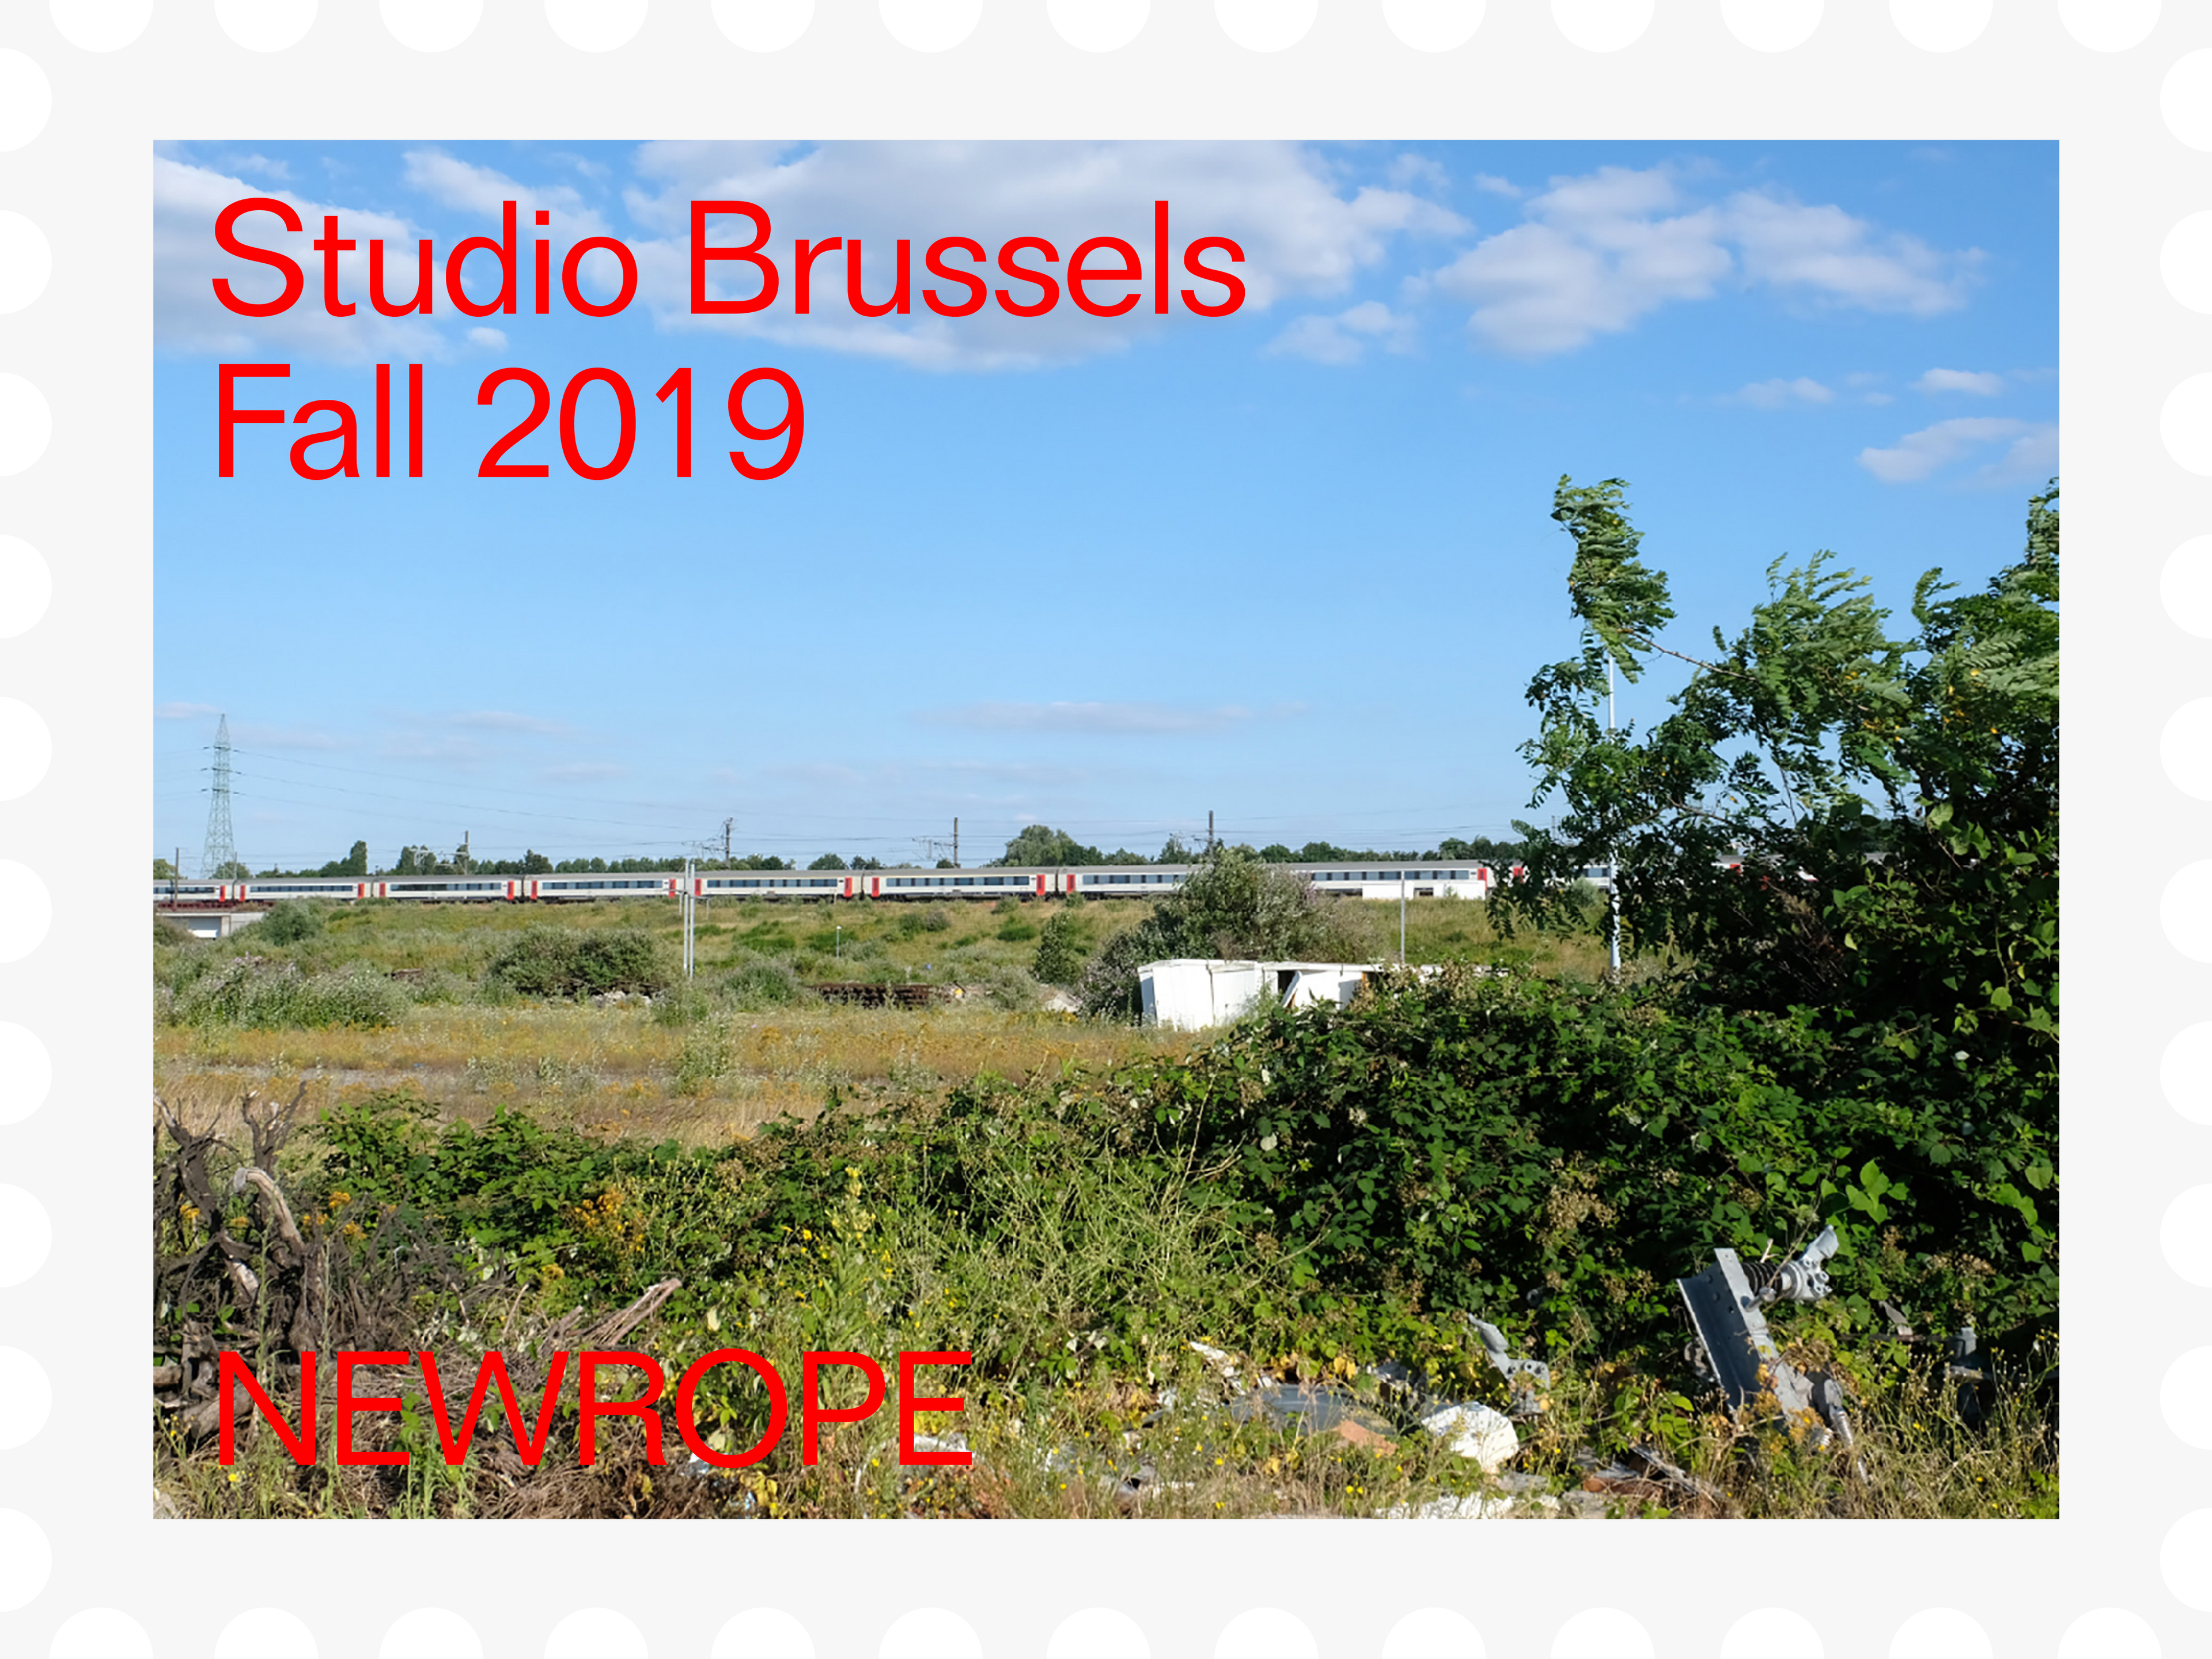 Places: Brussels, Design Studio, Fall 2019